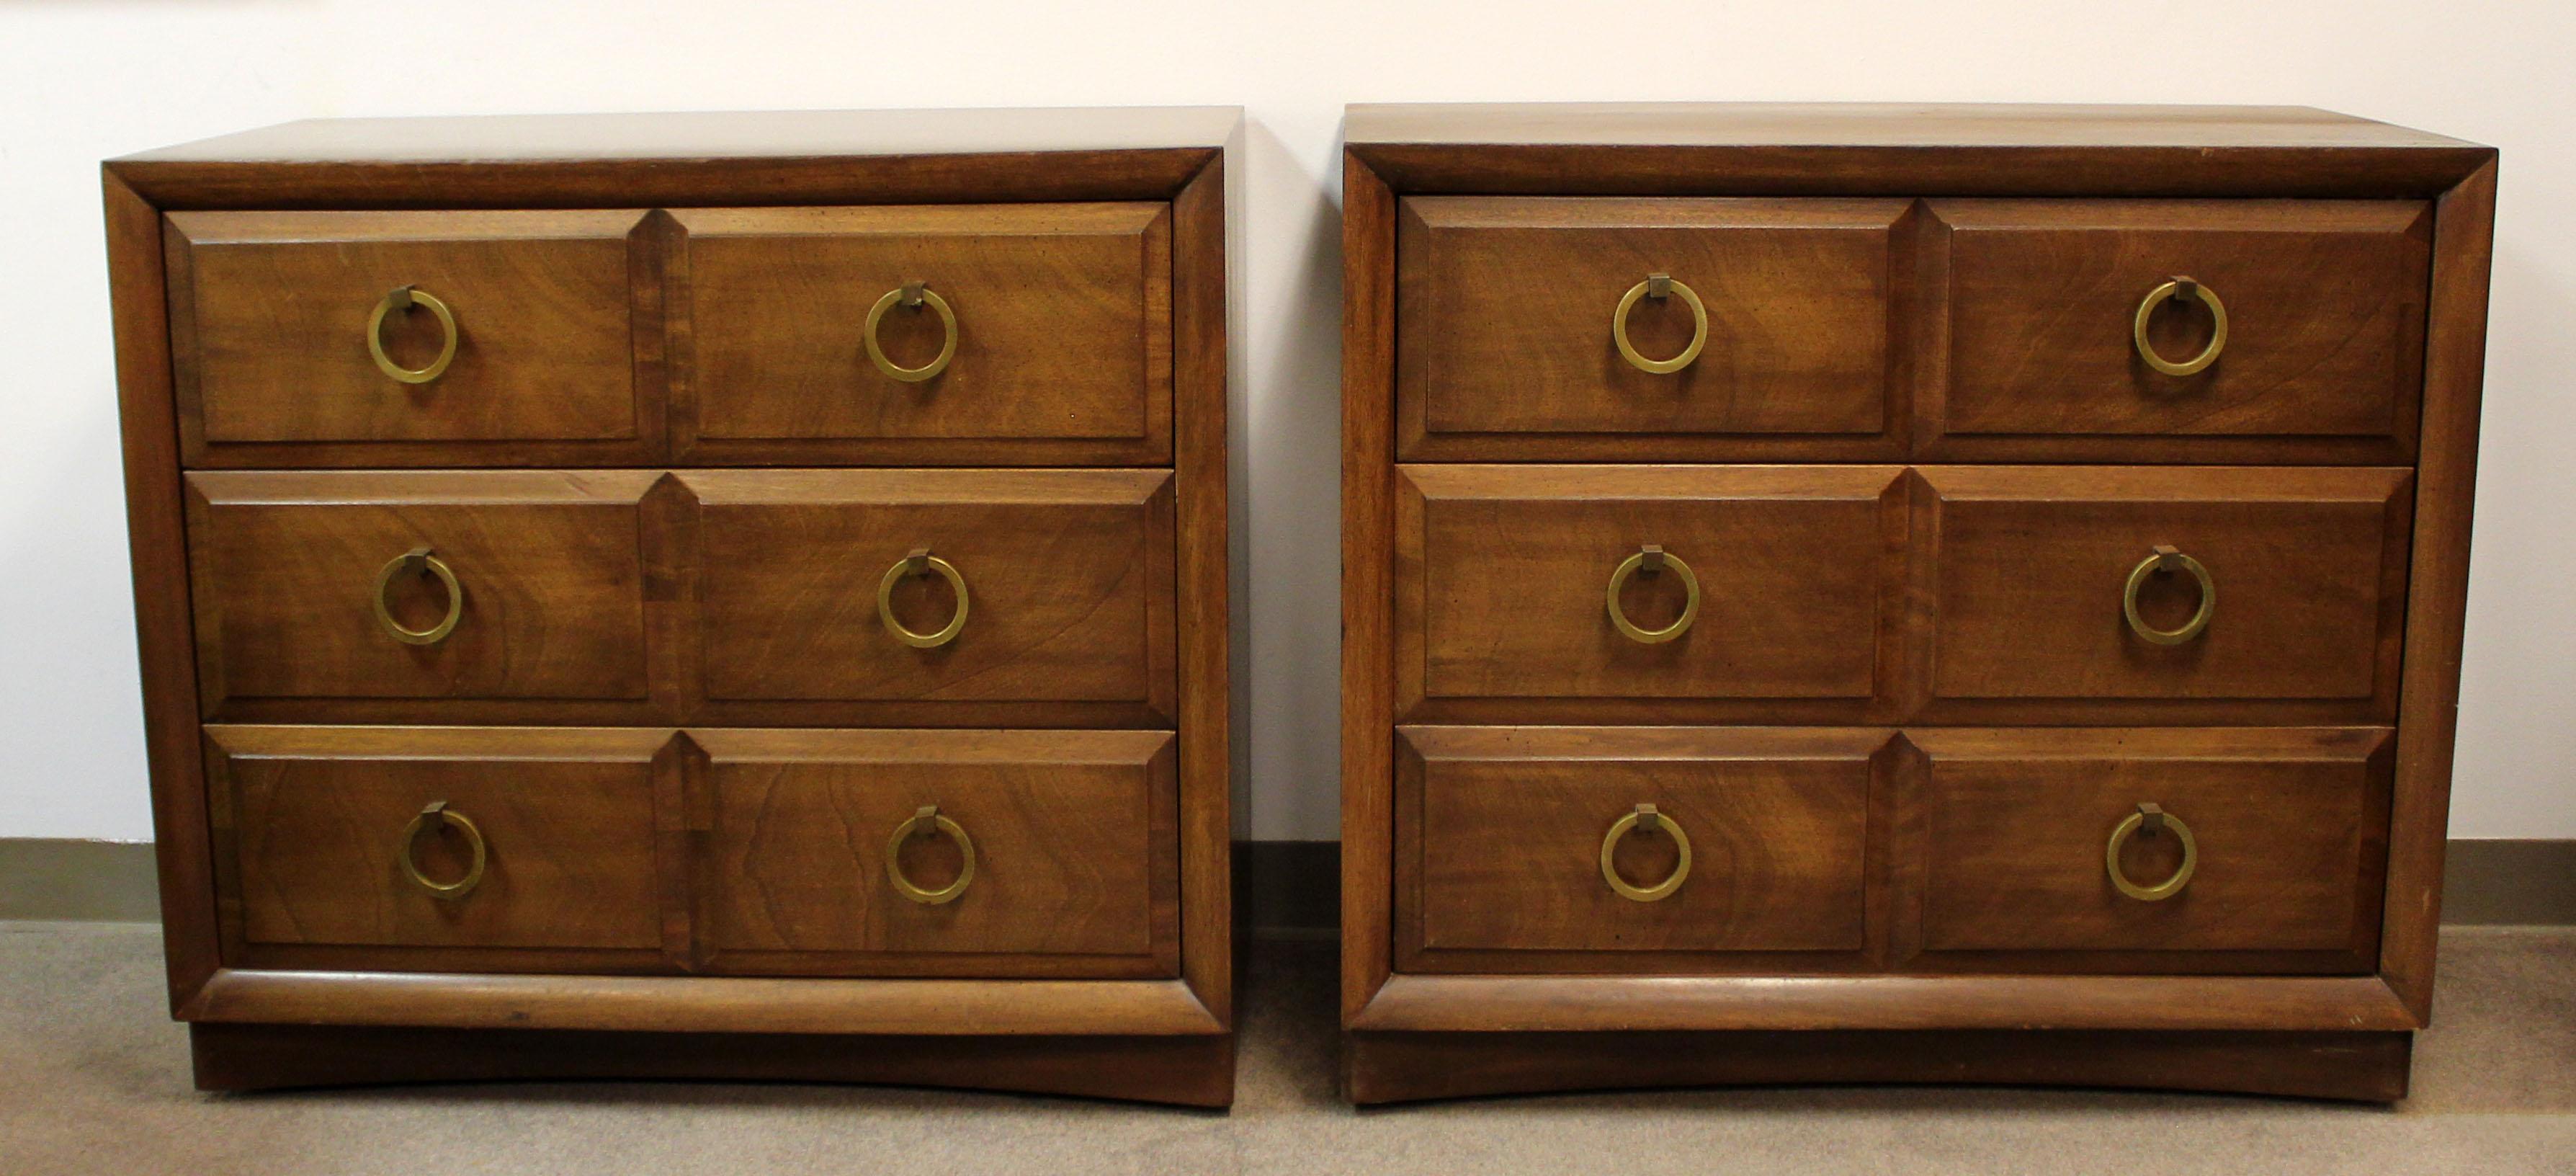 For your consideration is a wonderful pair of wooden dressers, with three drawers that have brass handles, by T.H. Robsjohn Gibbings, circa the 1950s. In excellent condition. The dimensions are 36